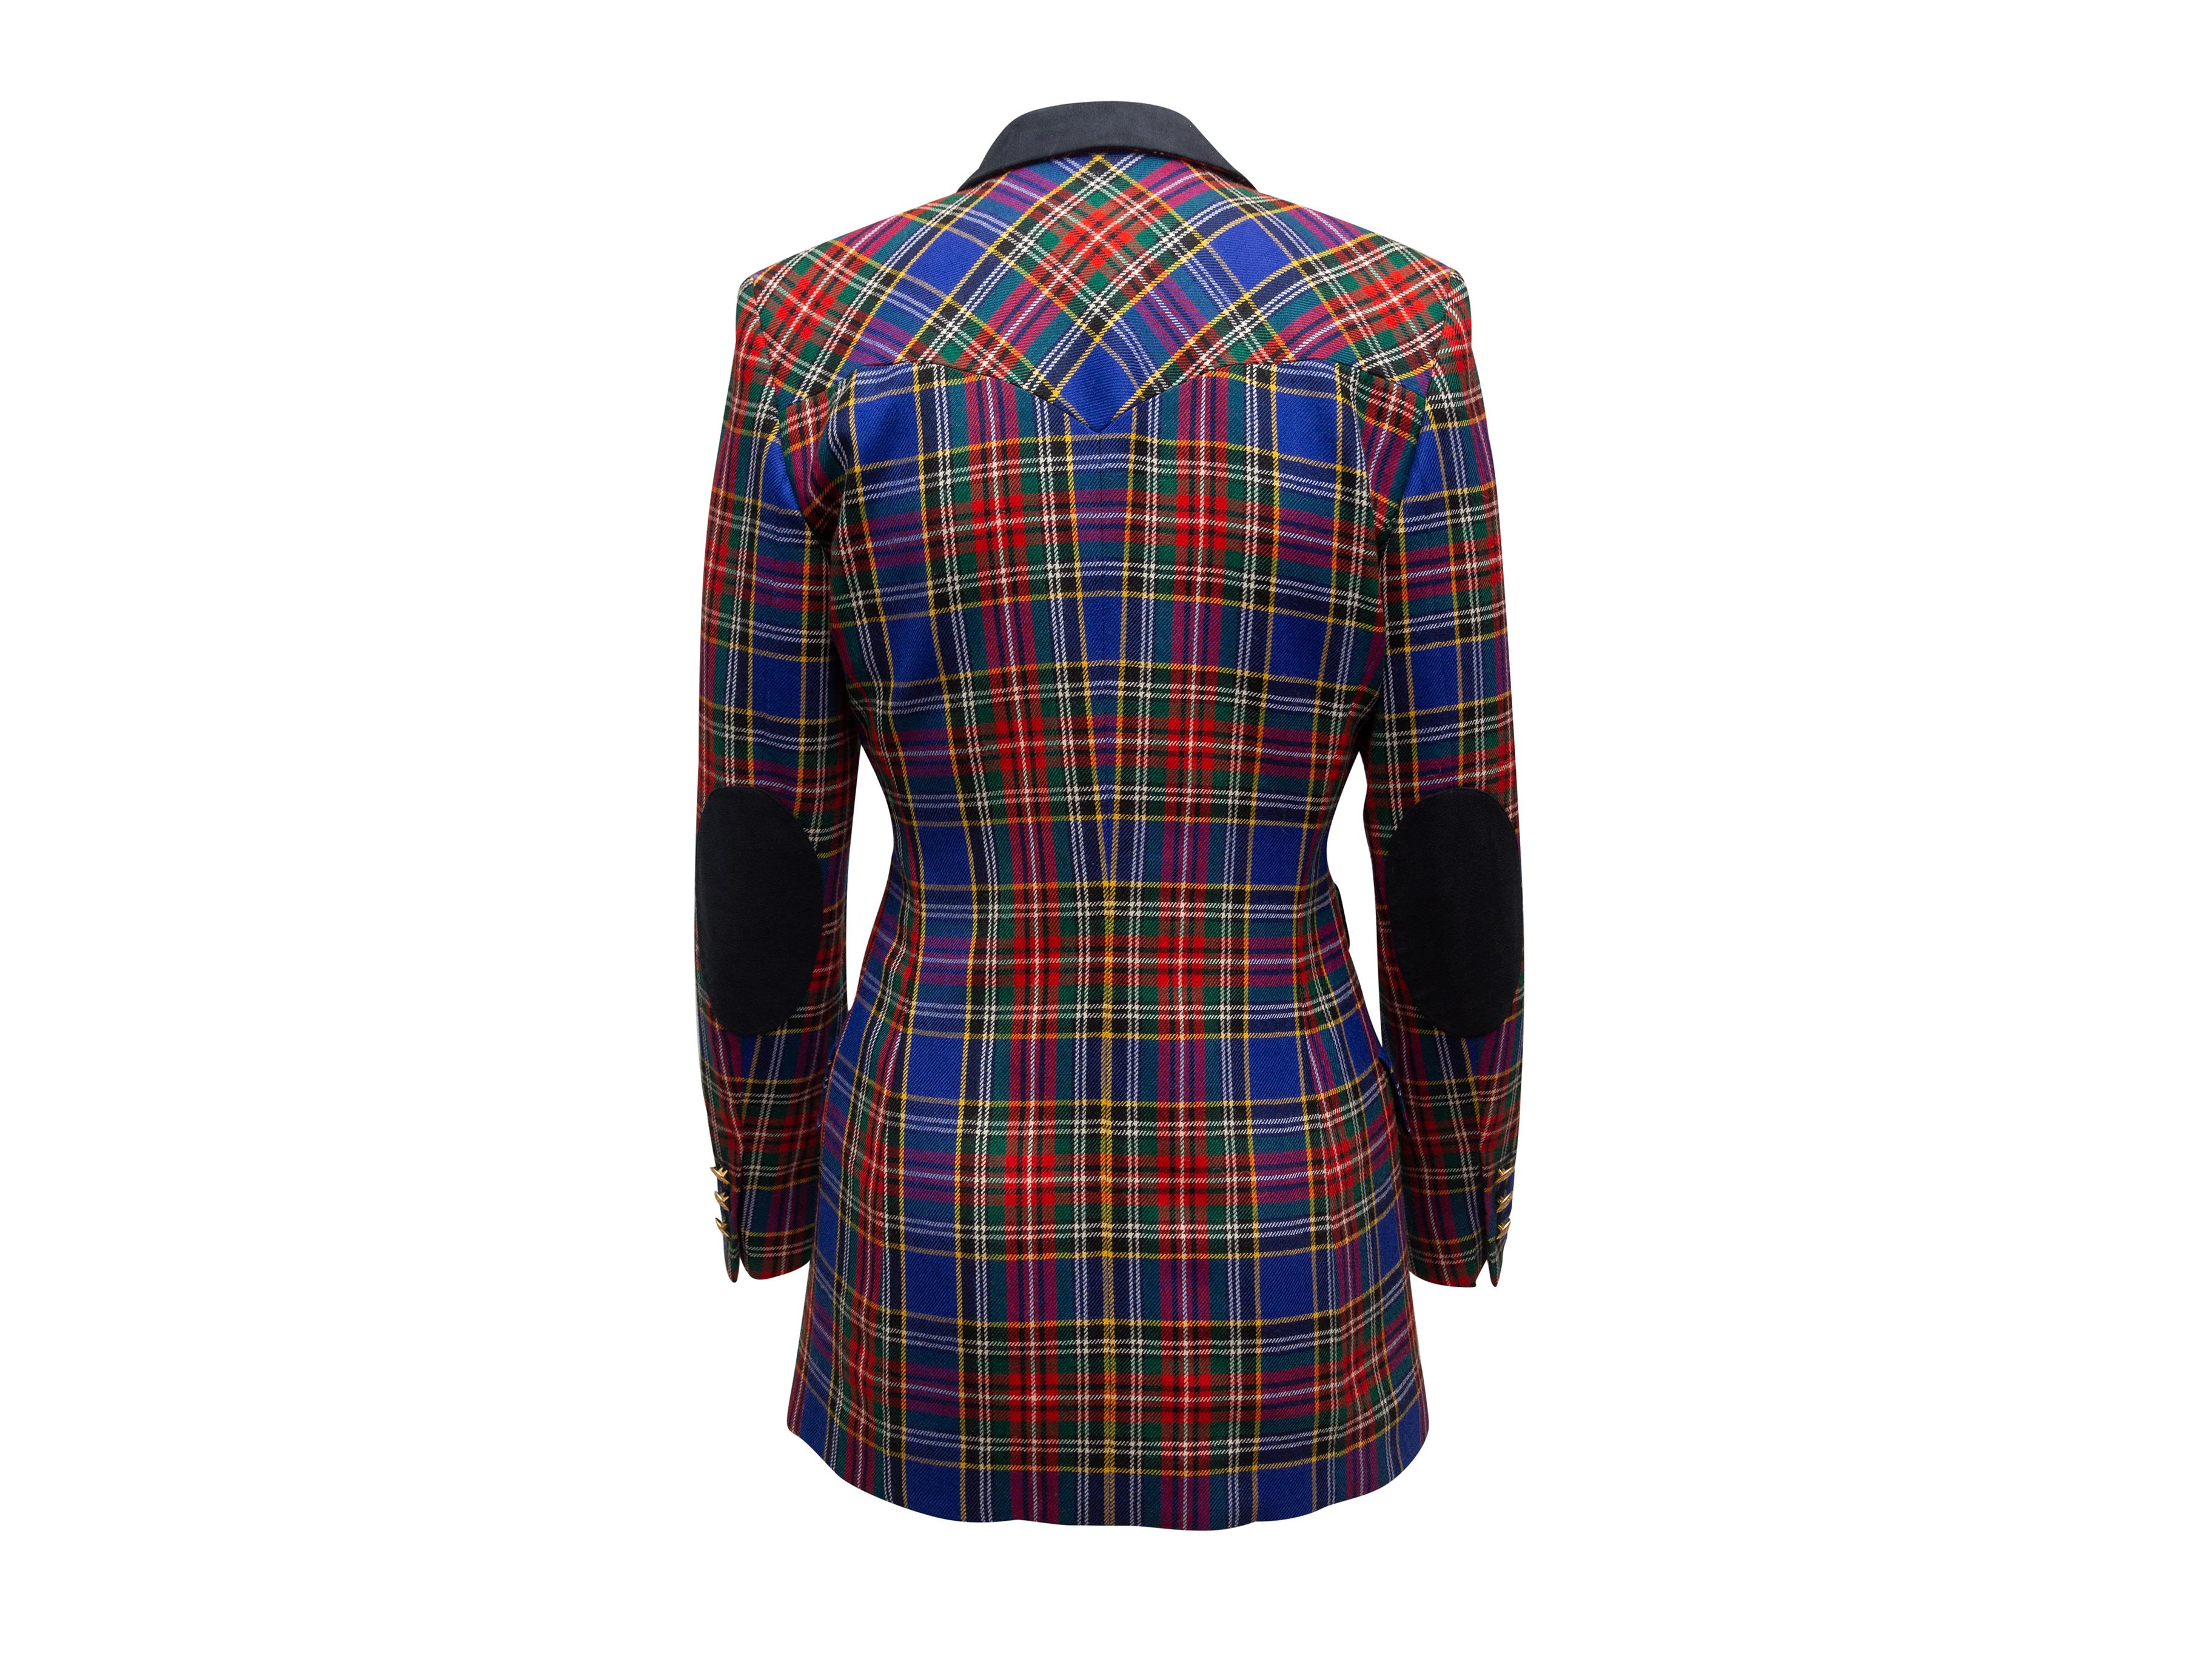 Product details: Blue and multicolor virgin wool plaid blazer by Escada Sport. Notched lapel. Three flap pockets. Button closures at front. Designer size 34. 36